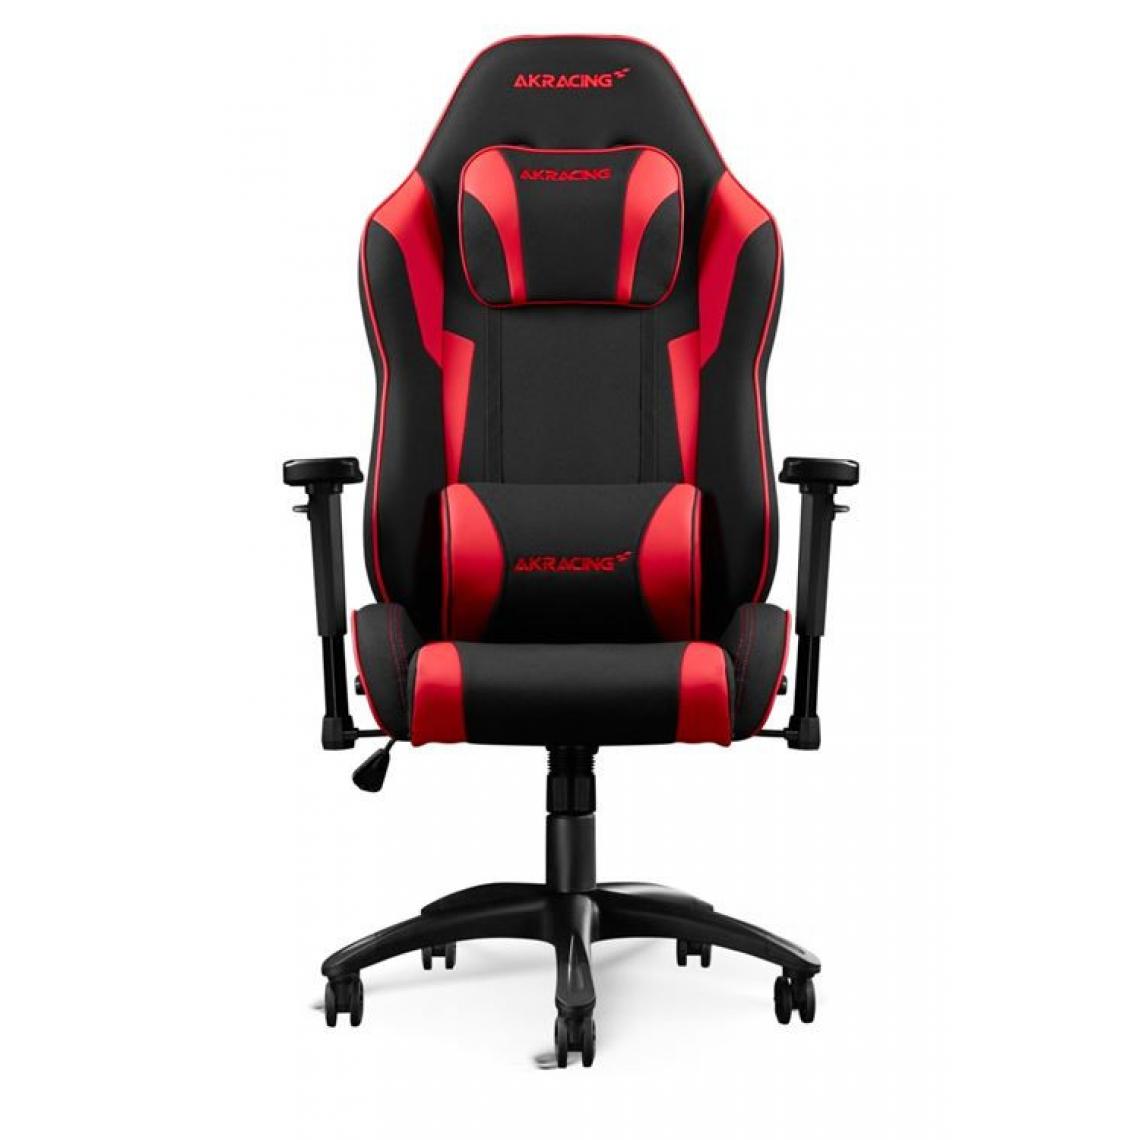 Akracing - Chaise Gaming AkRacing Série Core EX SE Rouge - Chaise gamer